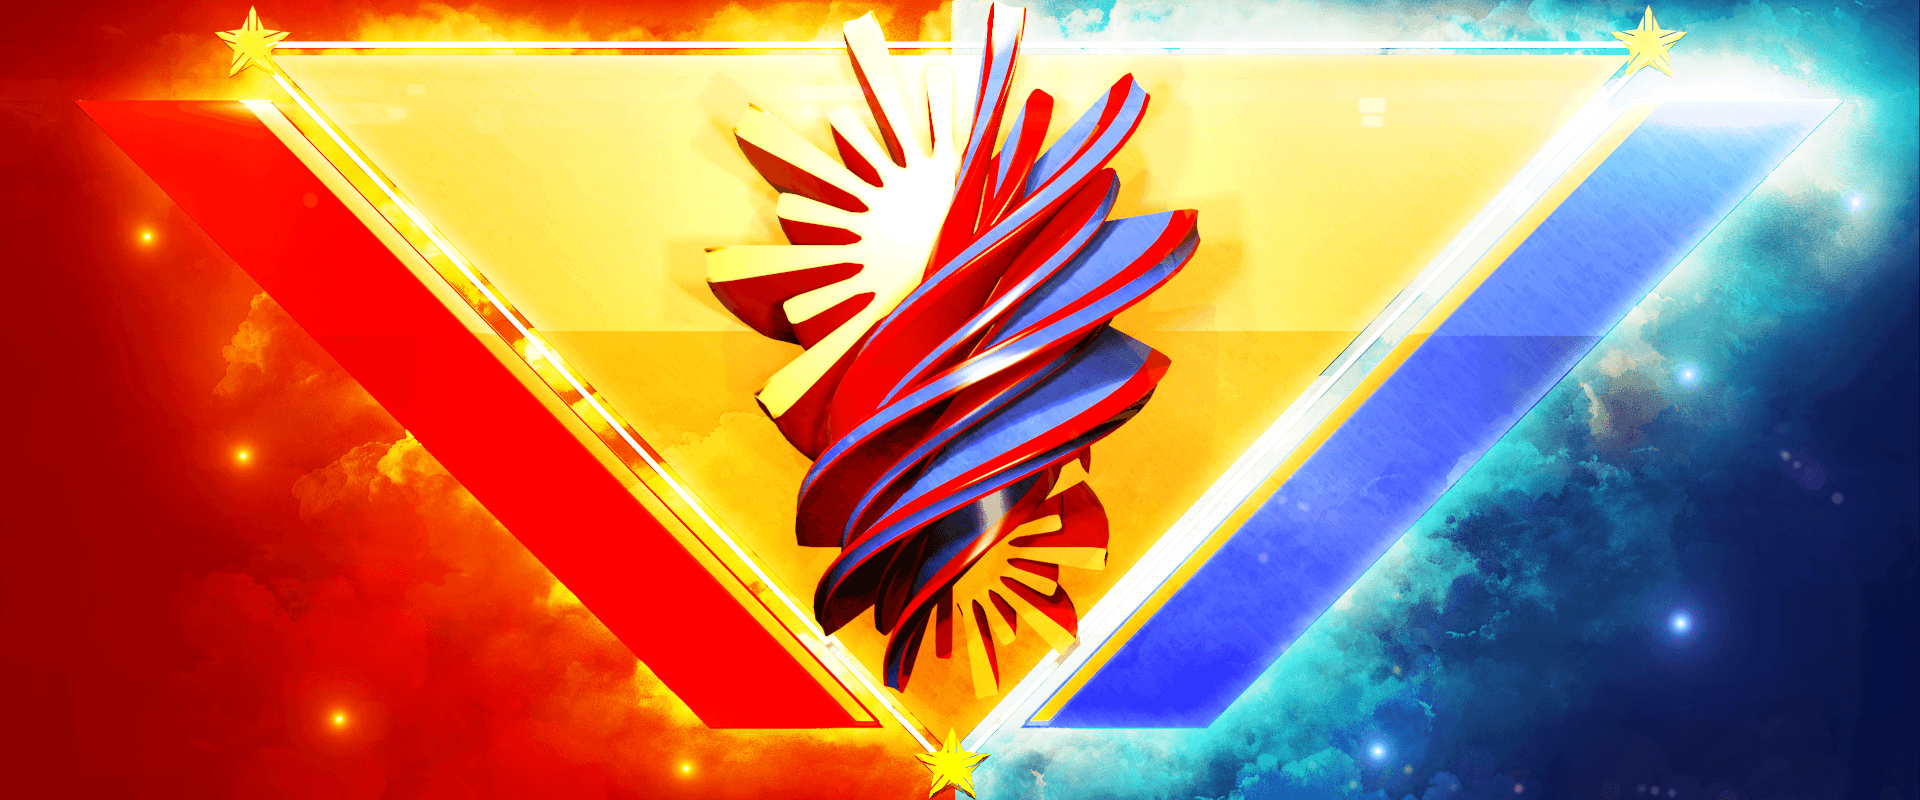 Philippine Flag Wallpapers - Wallpaper Cave